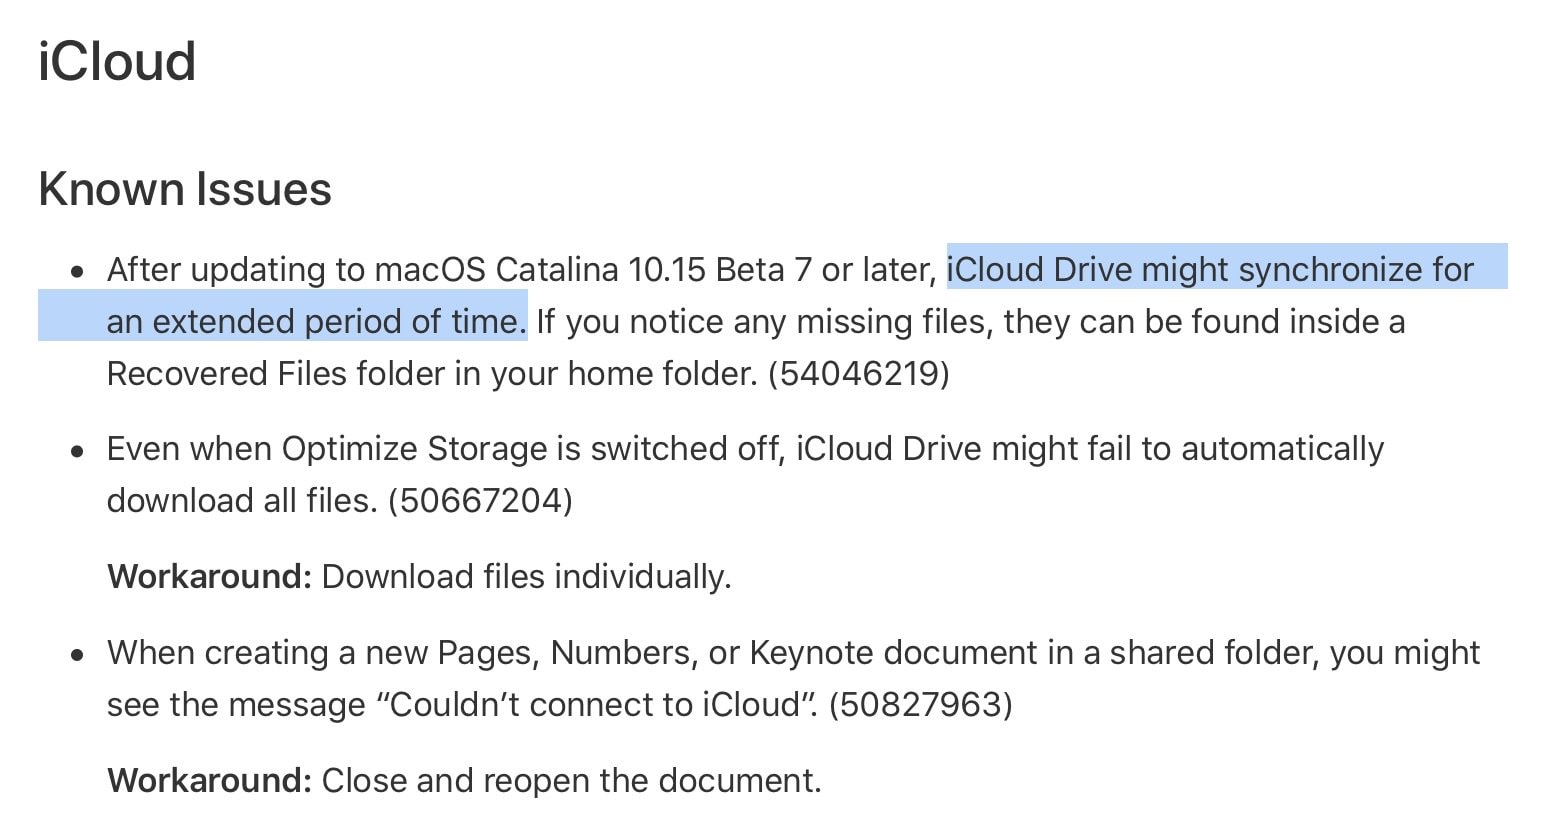 Apple's release notes show how shaky the new iCloud implementation was. 